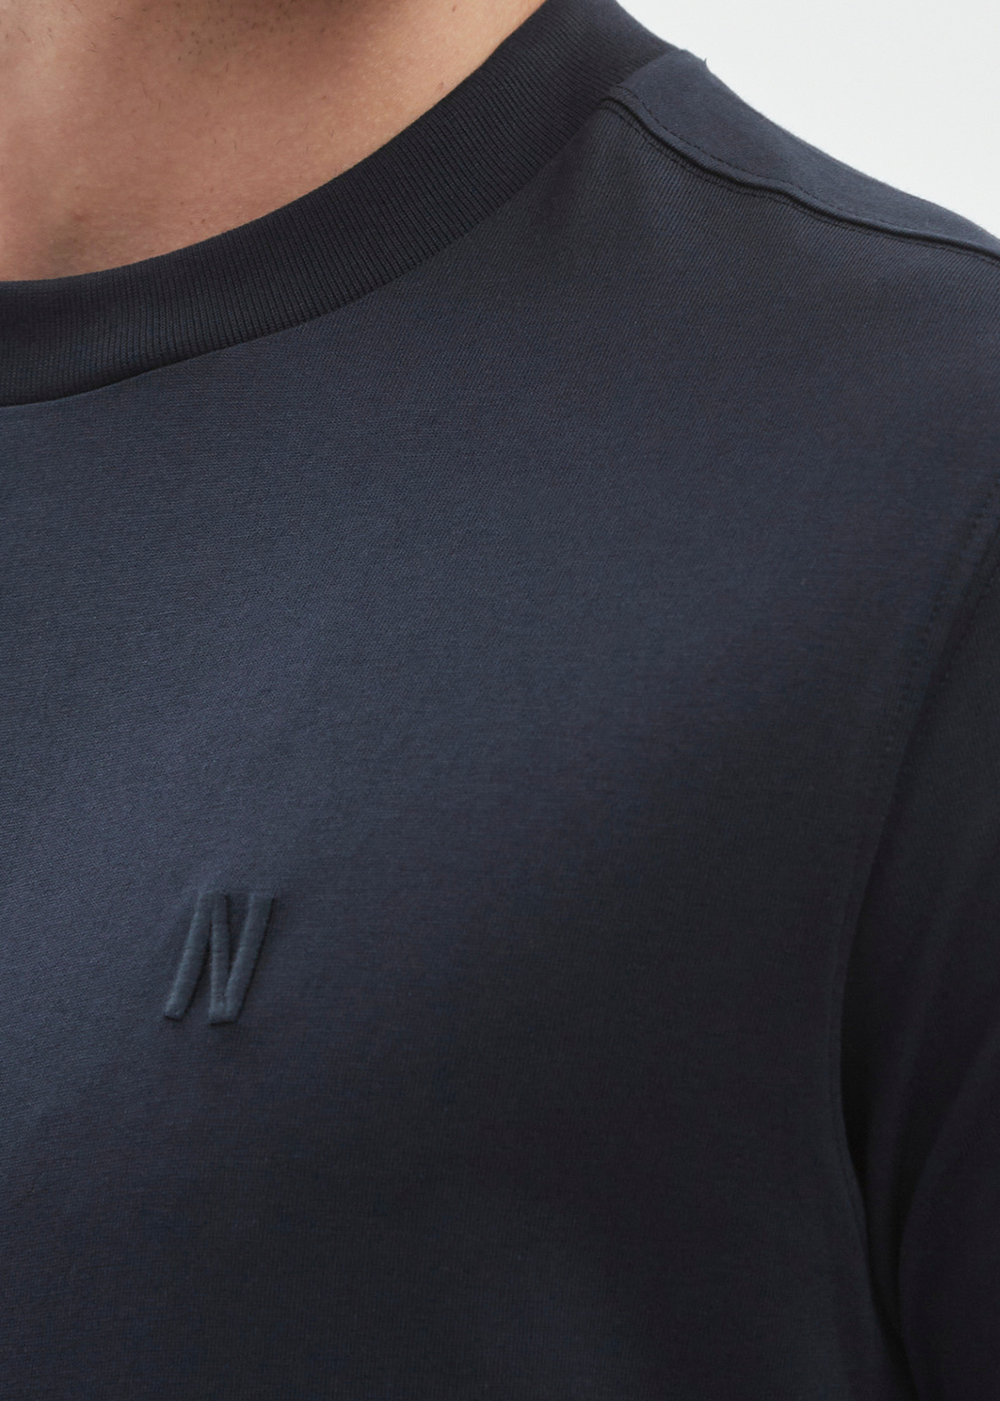 Close up of the embroidered "N" logo  on Johannes Organic T-Shirt by Norse Projects